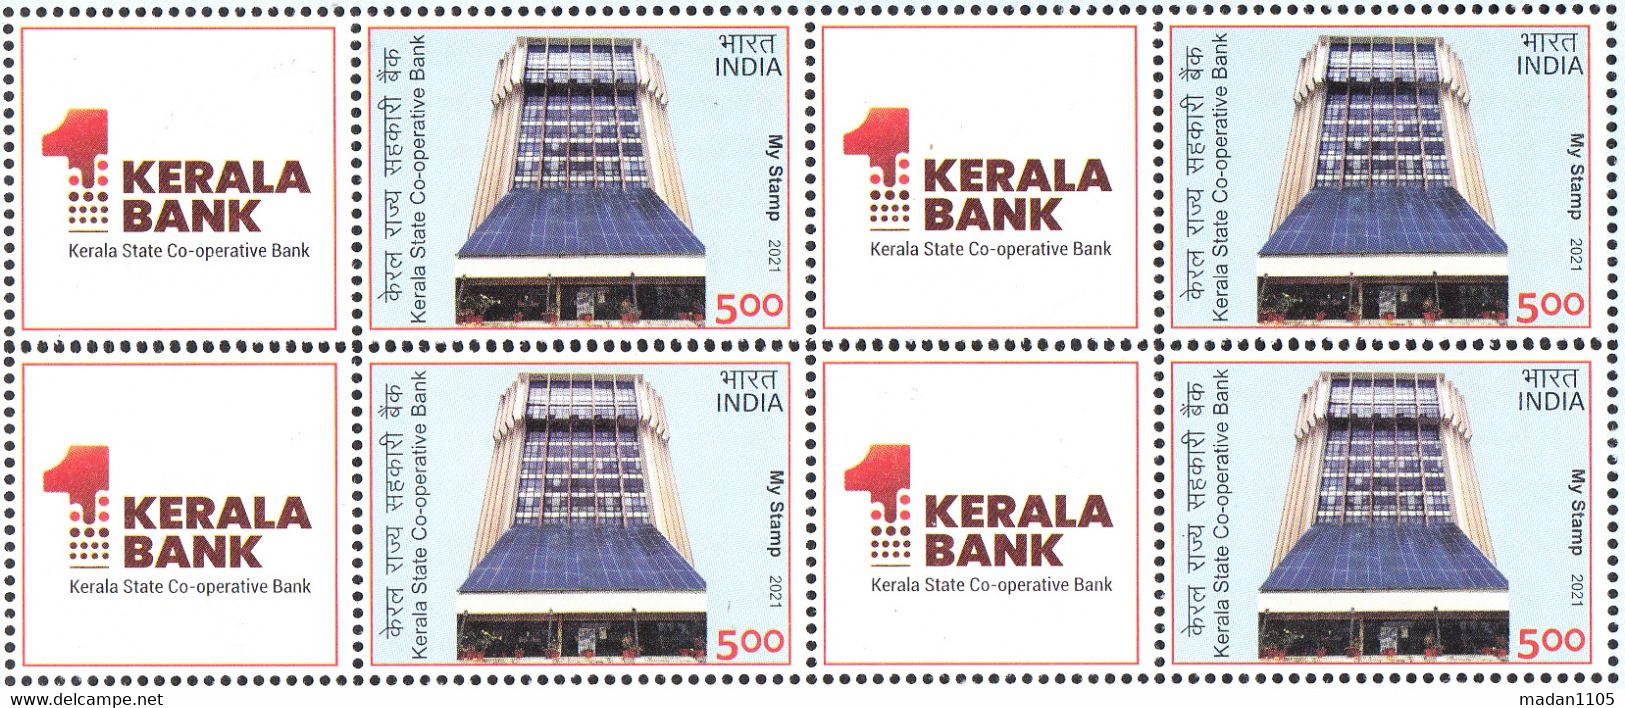 INDIA 2021 MY STAMP, KERALA STATE CO-OPERATIVE BANK. 769 Branches Across Kerala,Block Of 4,LIMITED ISSUE, MNH(**) - Ungebraucht